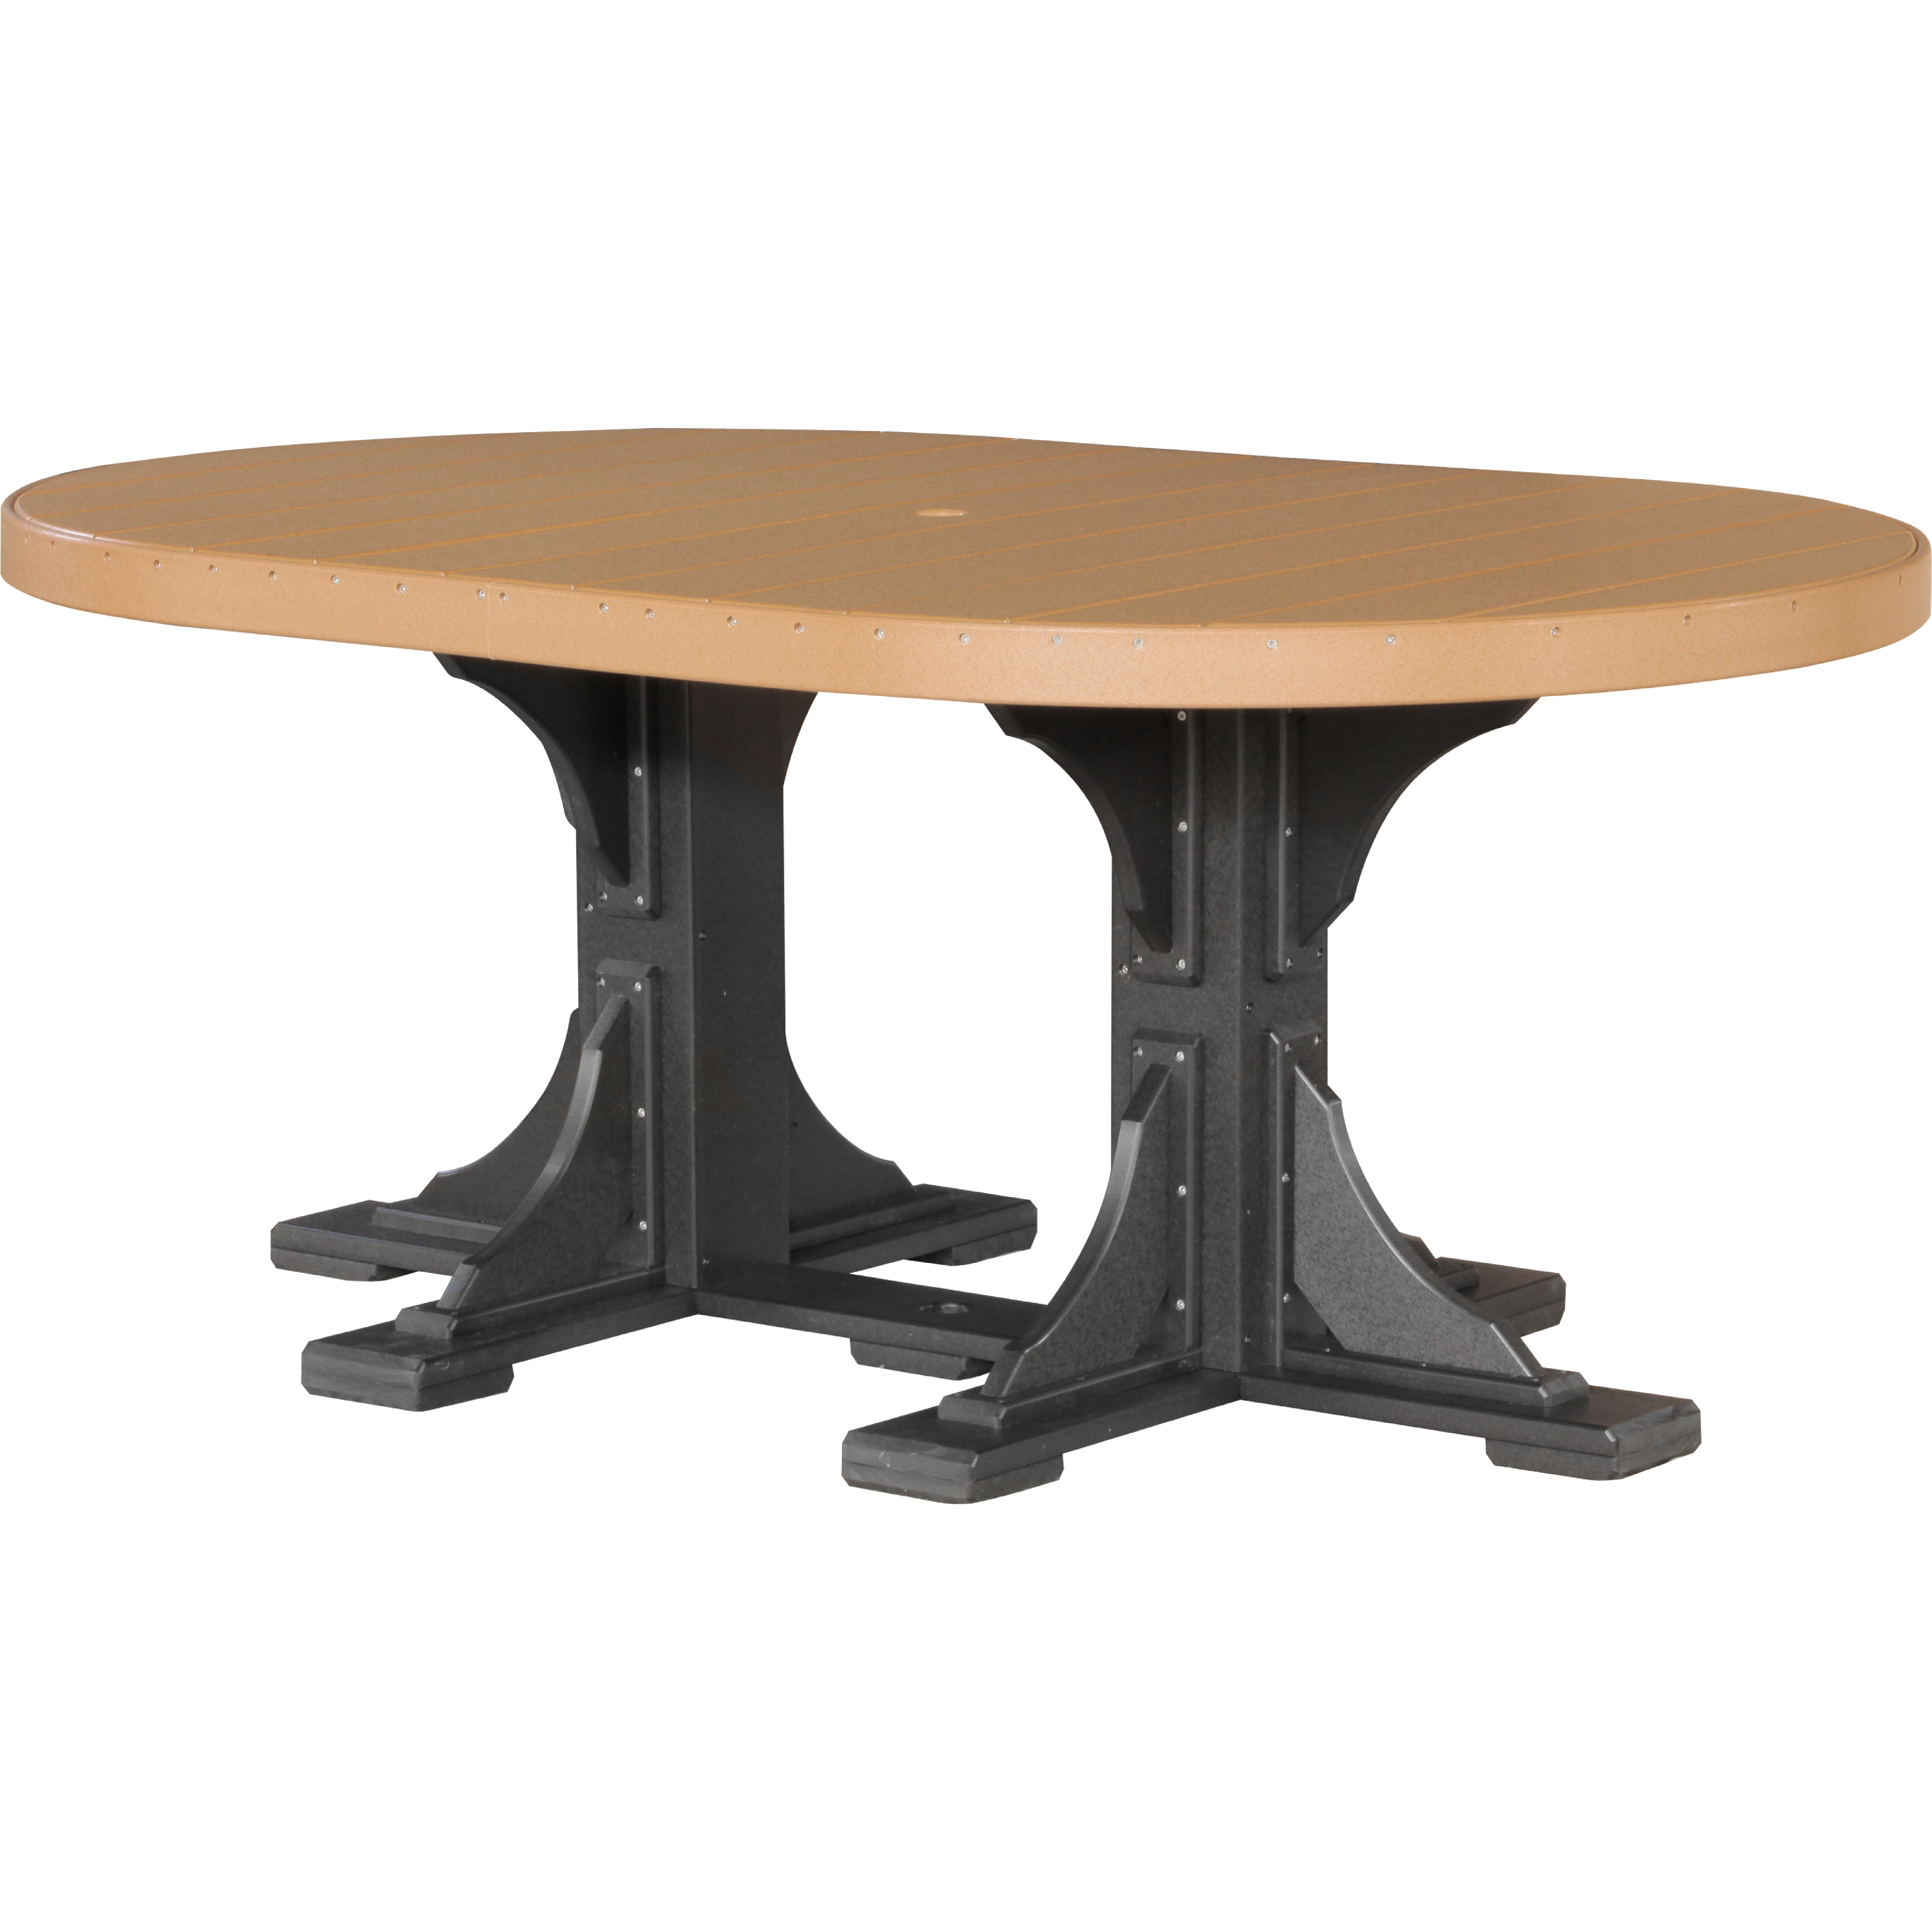 4' x 6' Oval Table